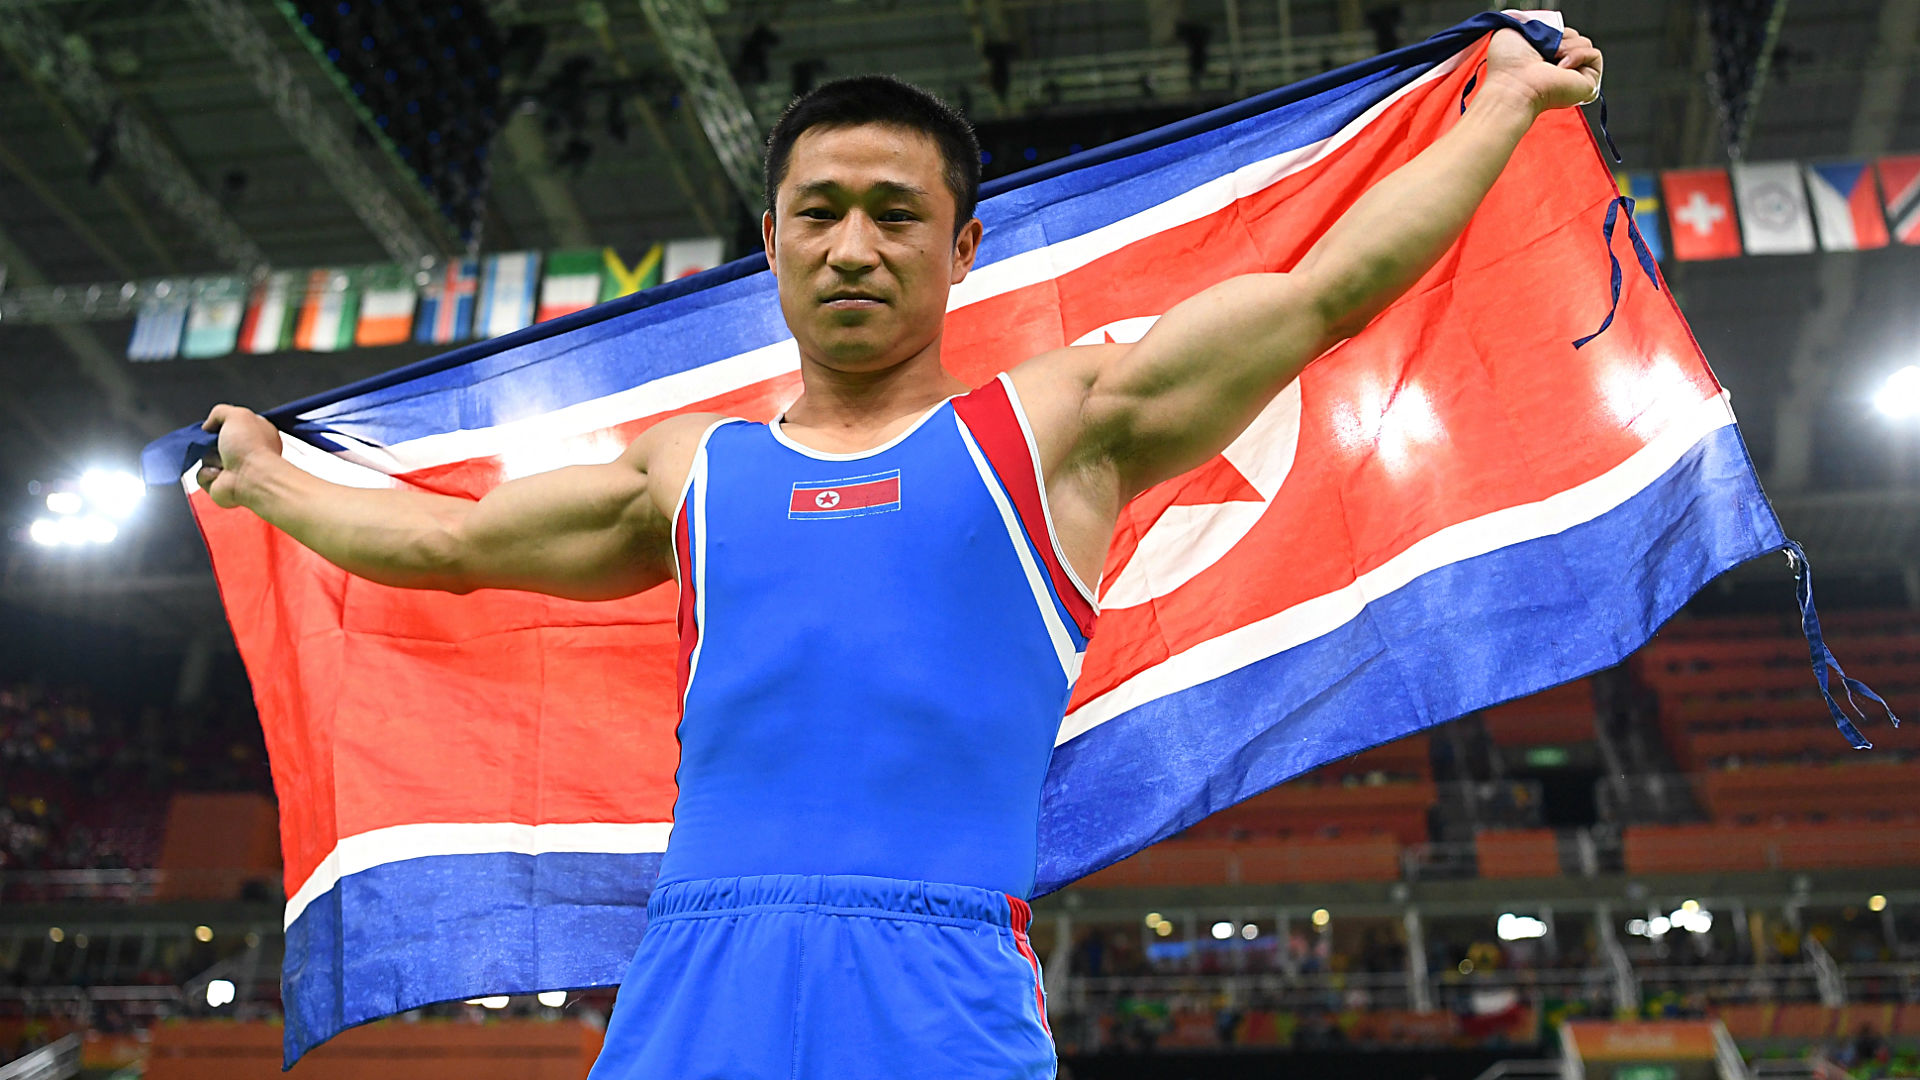 Gymnast and gold medalist Ri Se Gwang holds the North Korean flag at the Olympic Games in Rio de Janeiro, Brazil. (Photo: Laurence Griffiths/Getty)